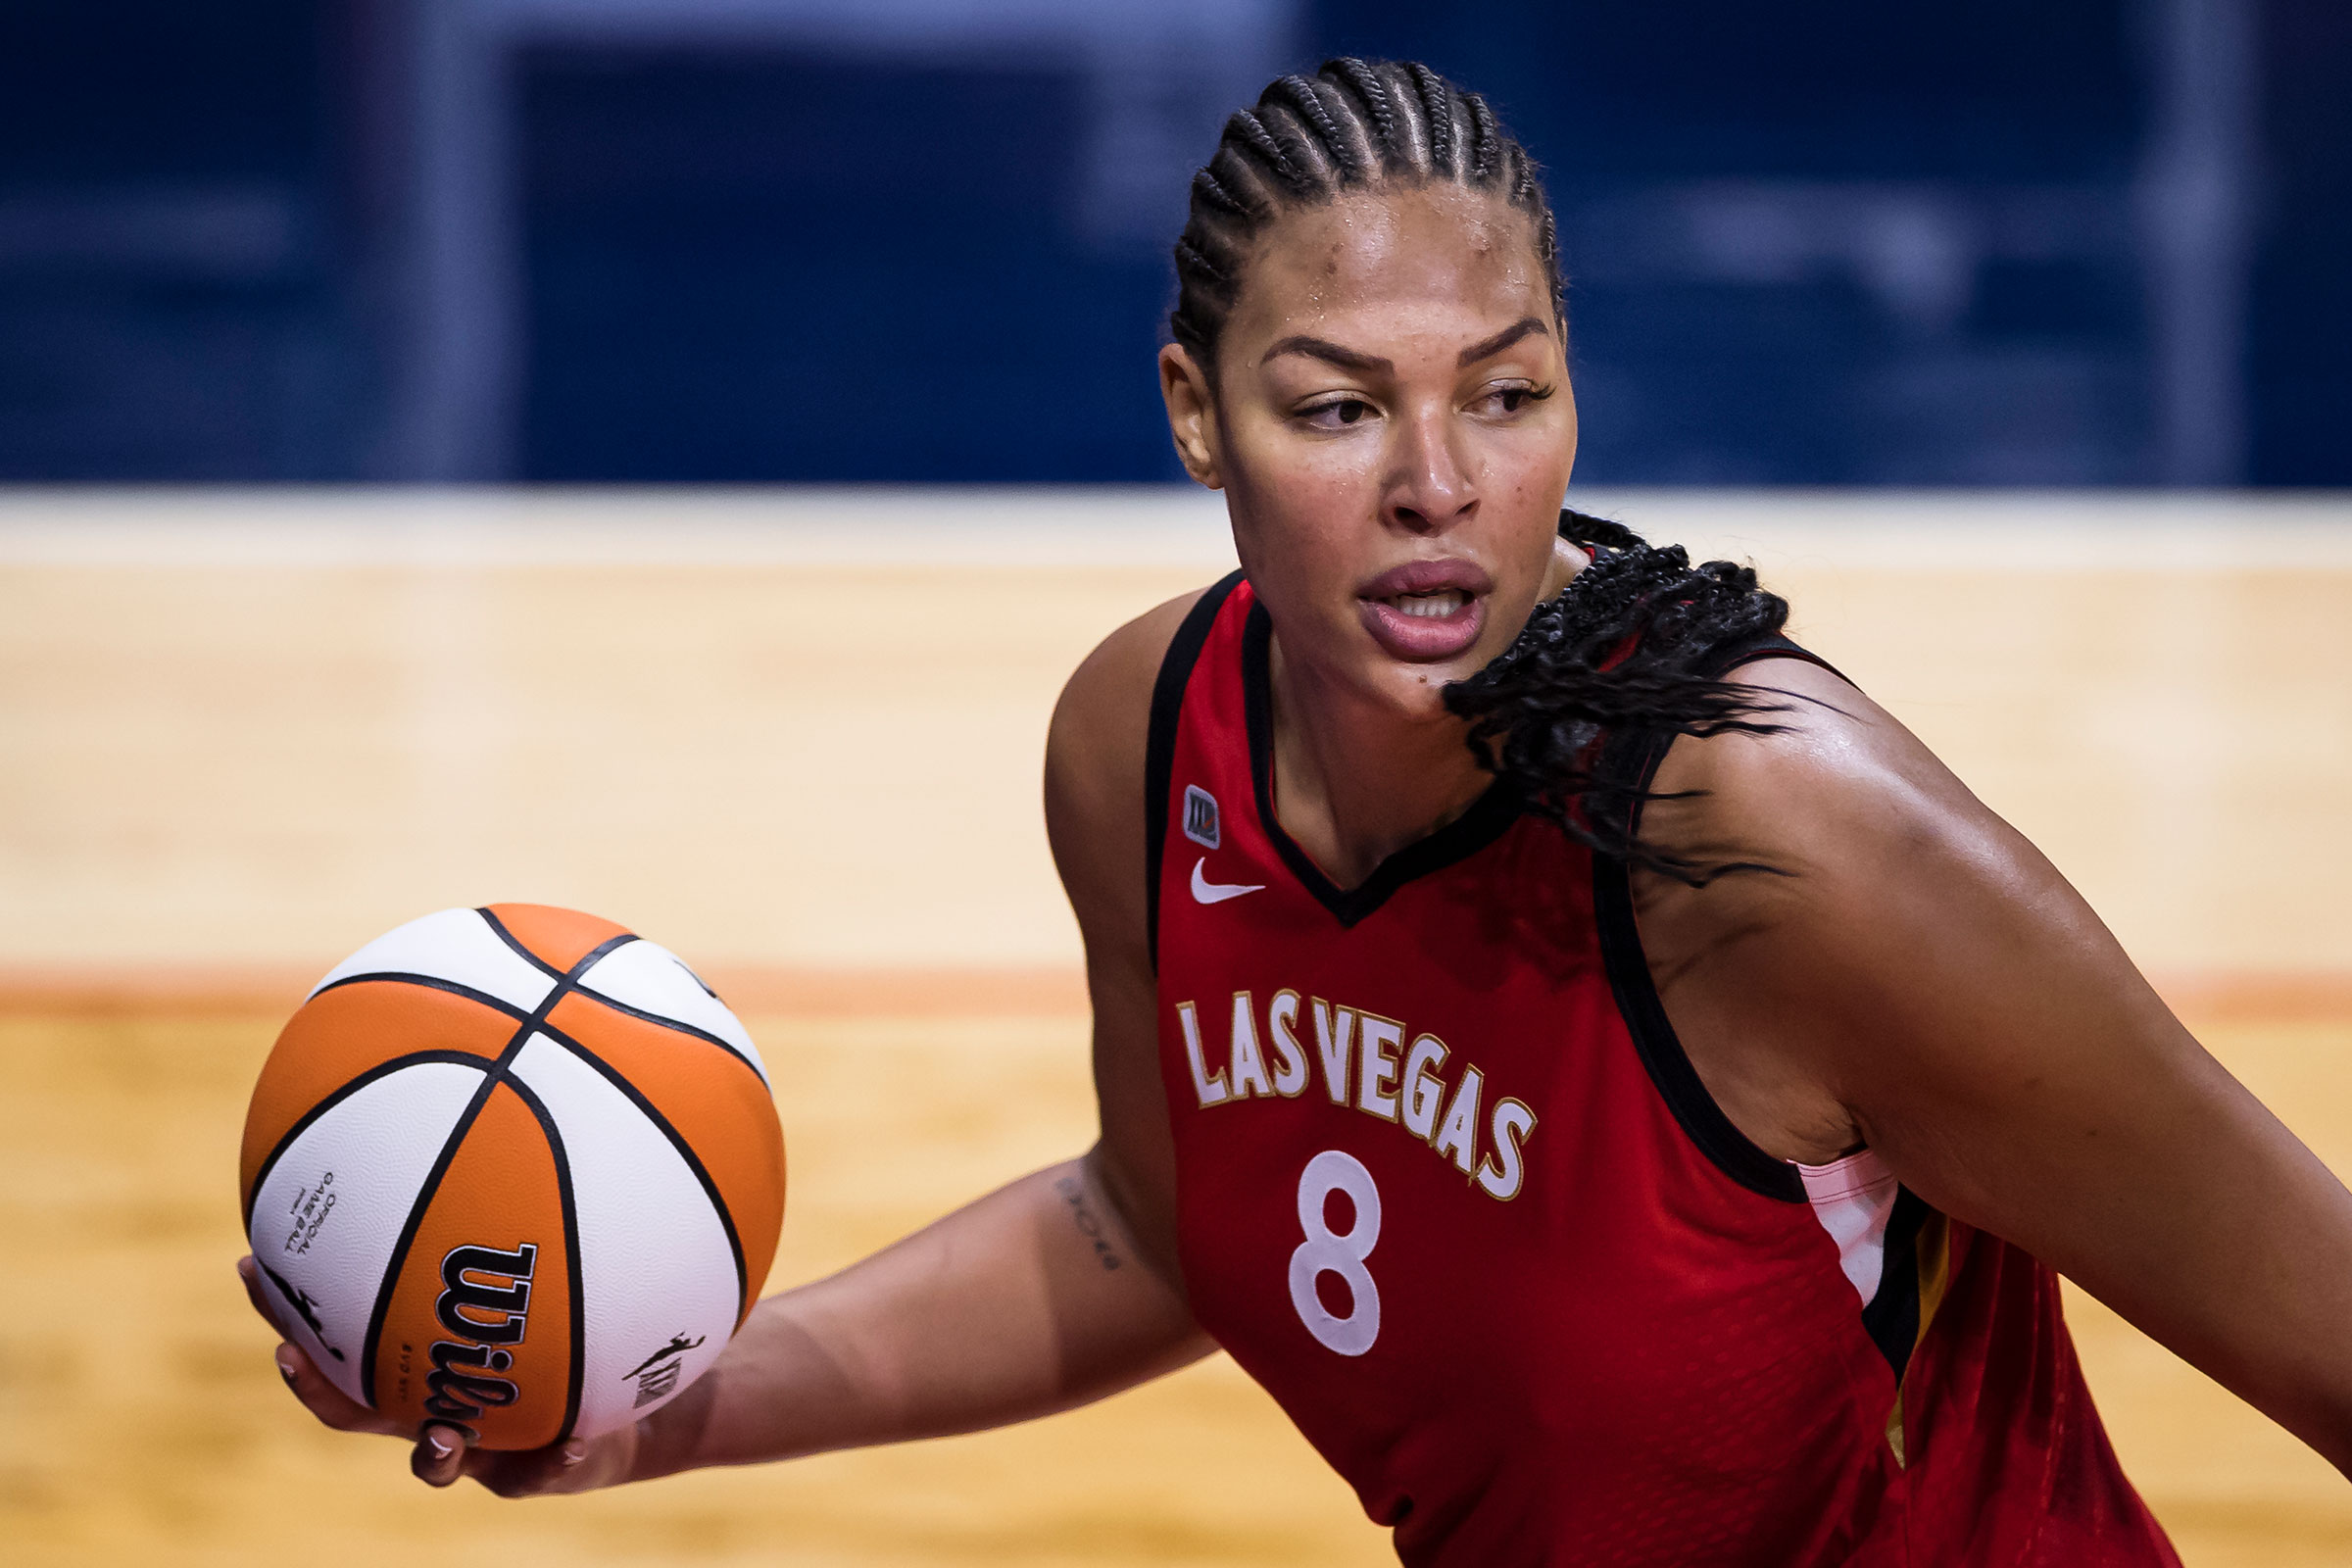 Liz Cambage of the Las Vegas Aces in action against the Washington Mystics on June 5, 2021 in Washington, DC.